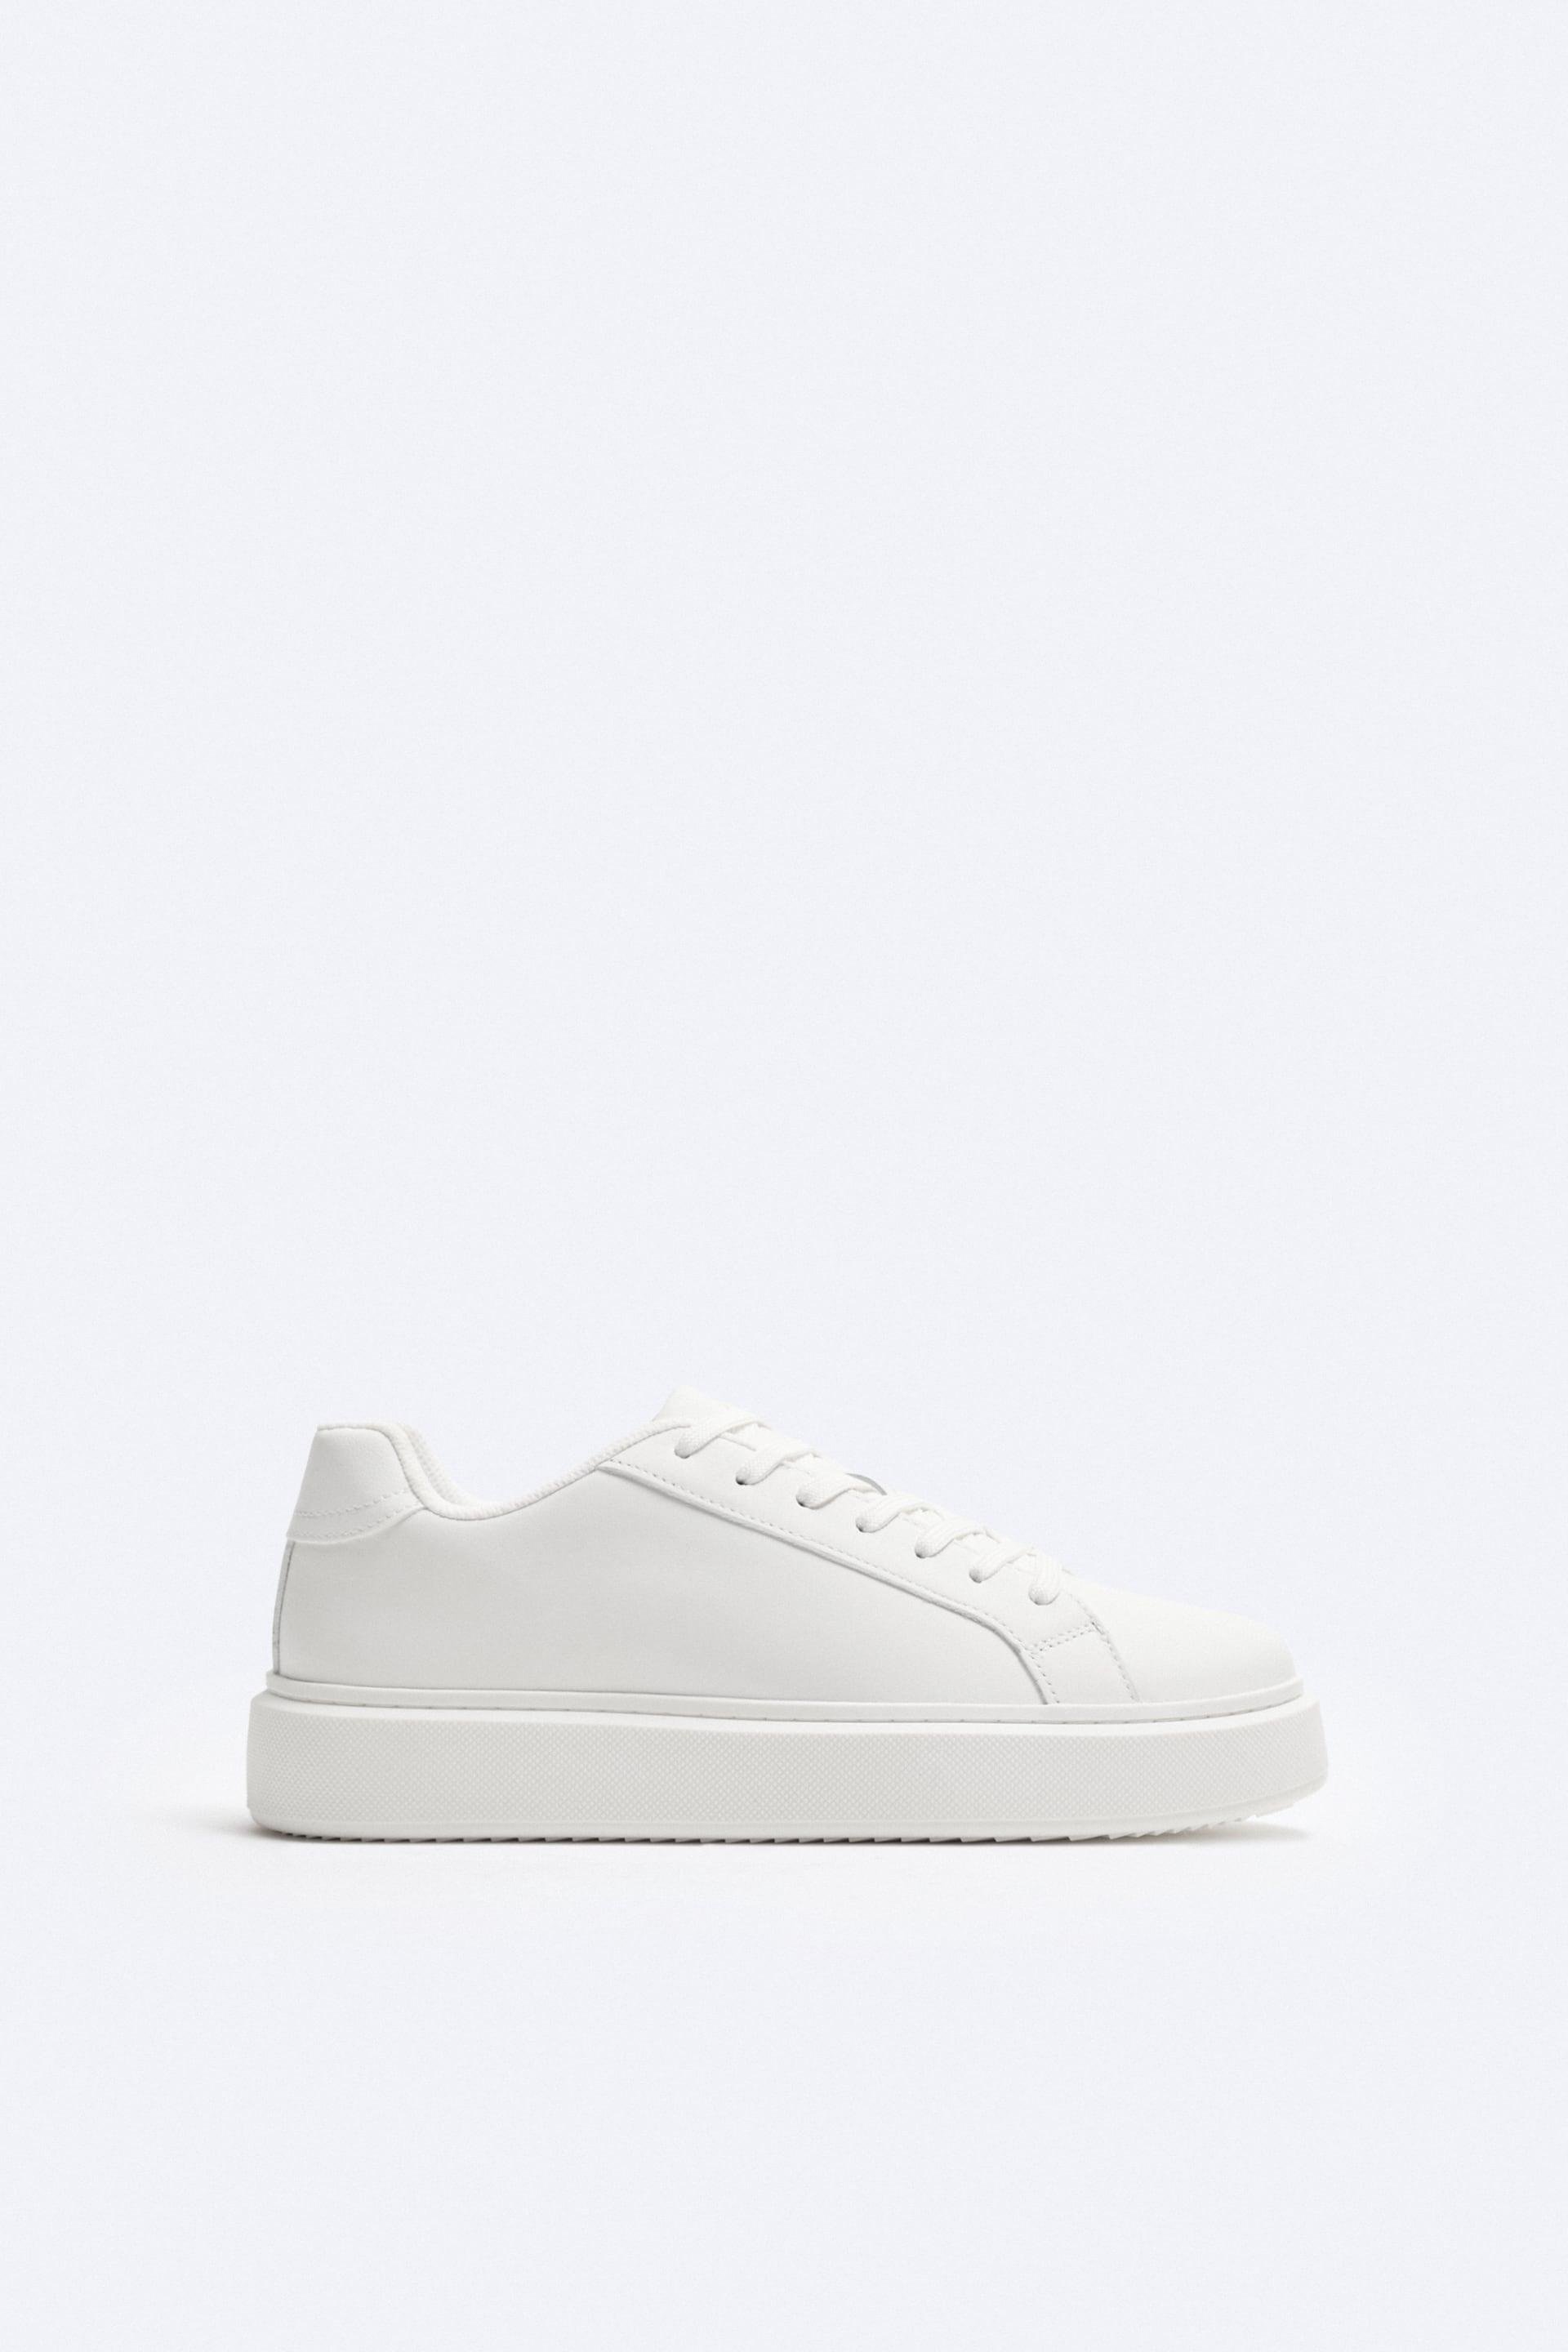 LEATHER SNEAKERS by ZARA